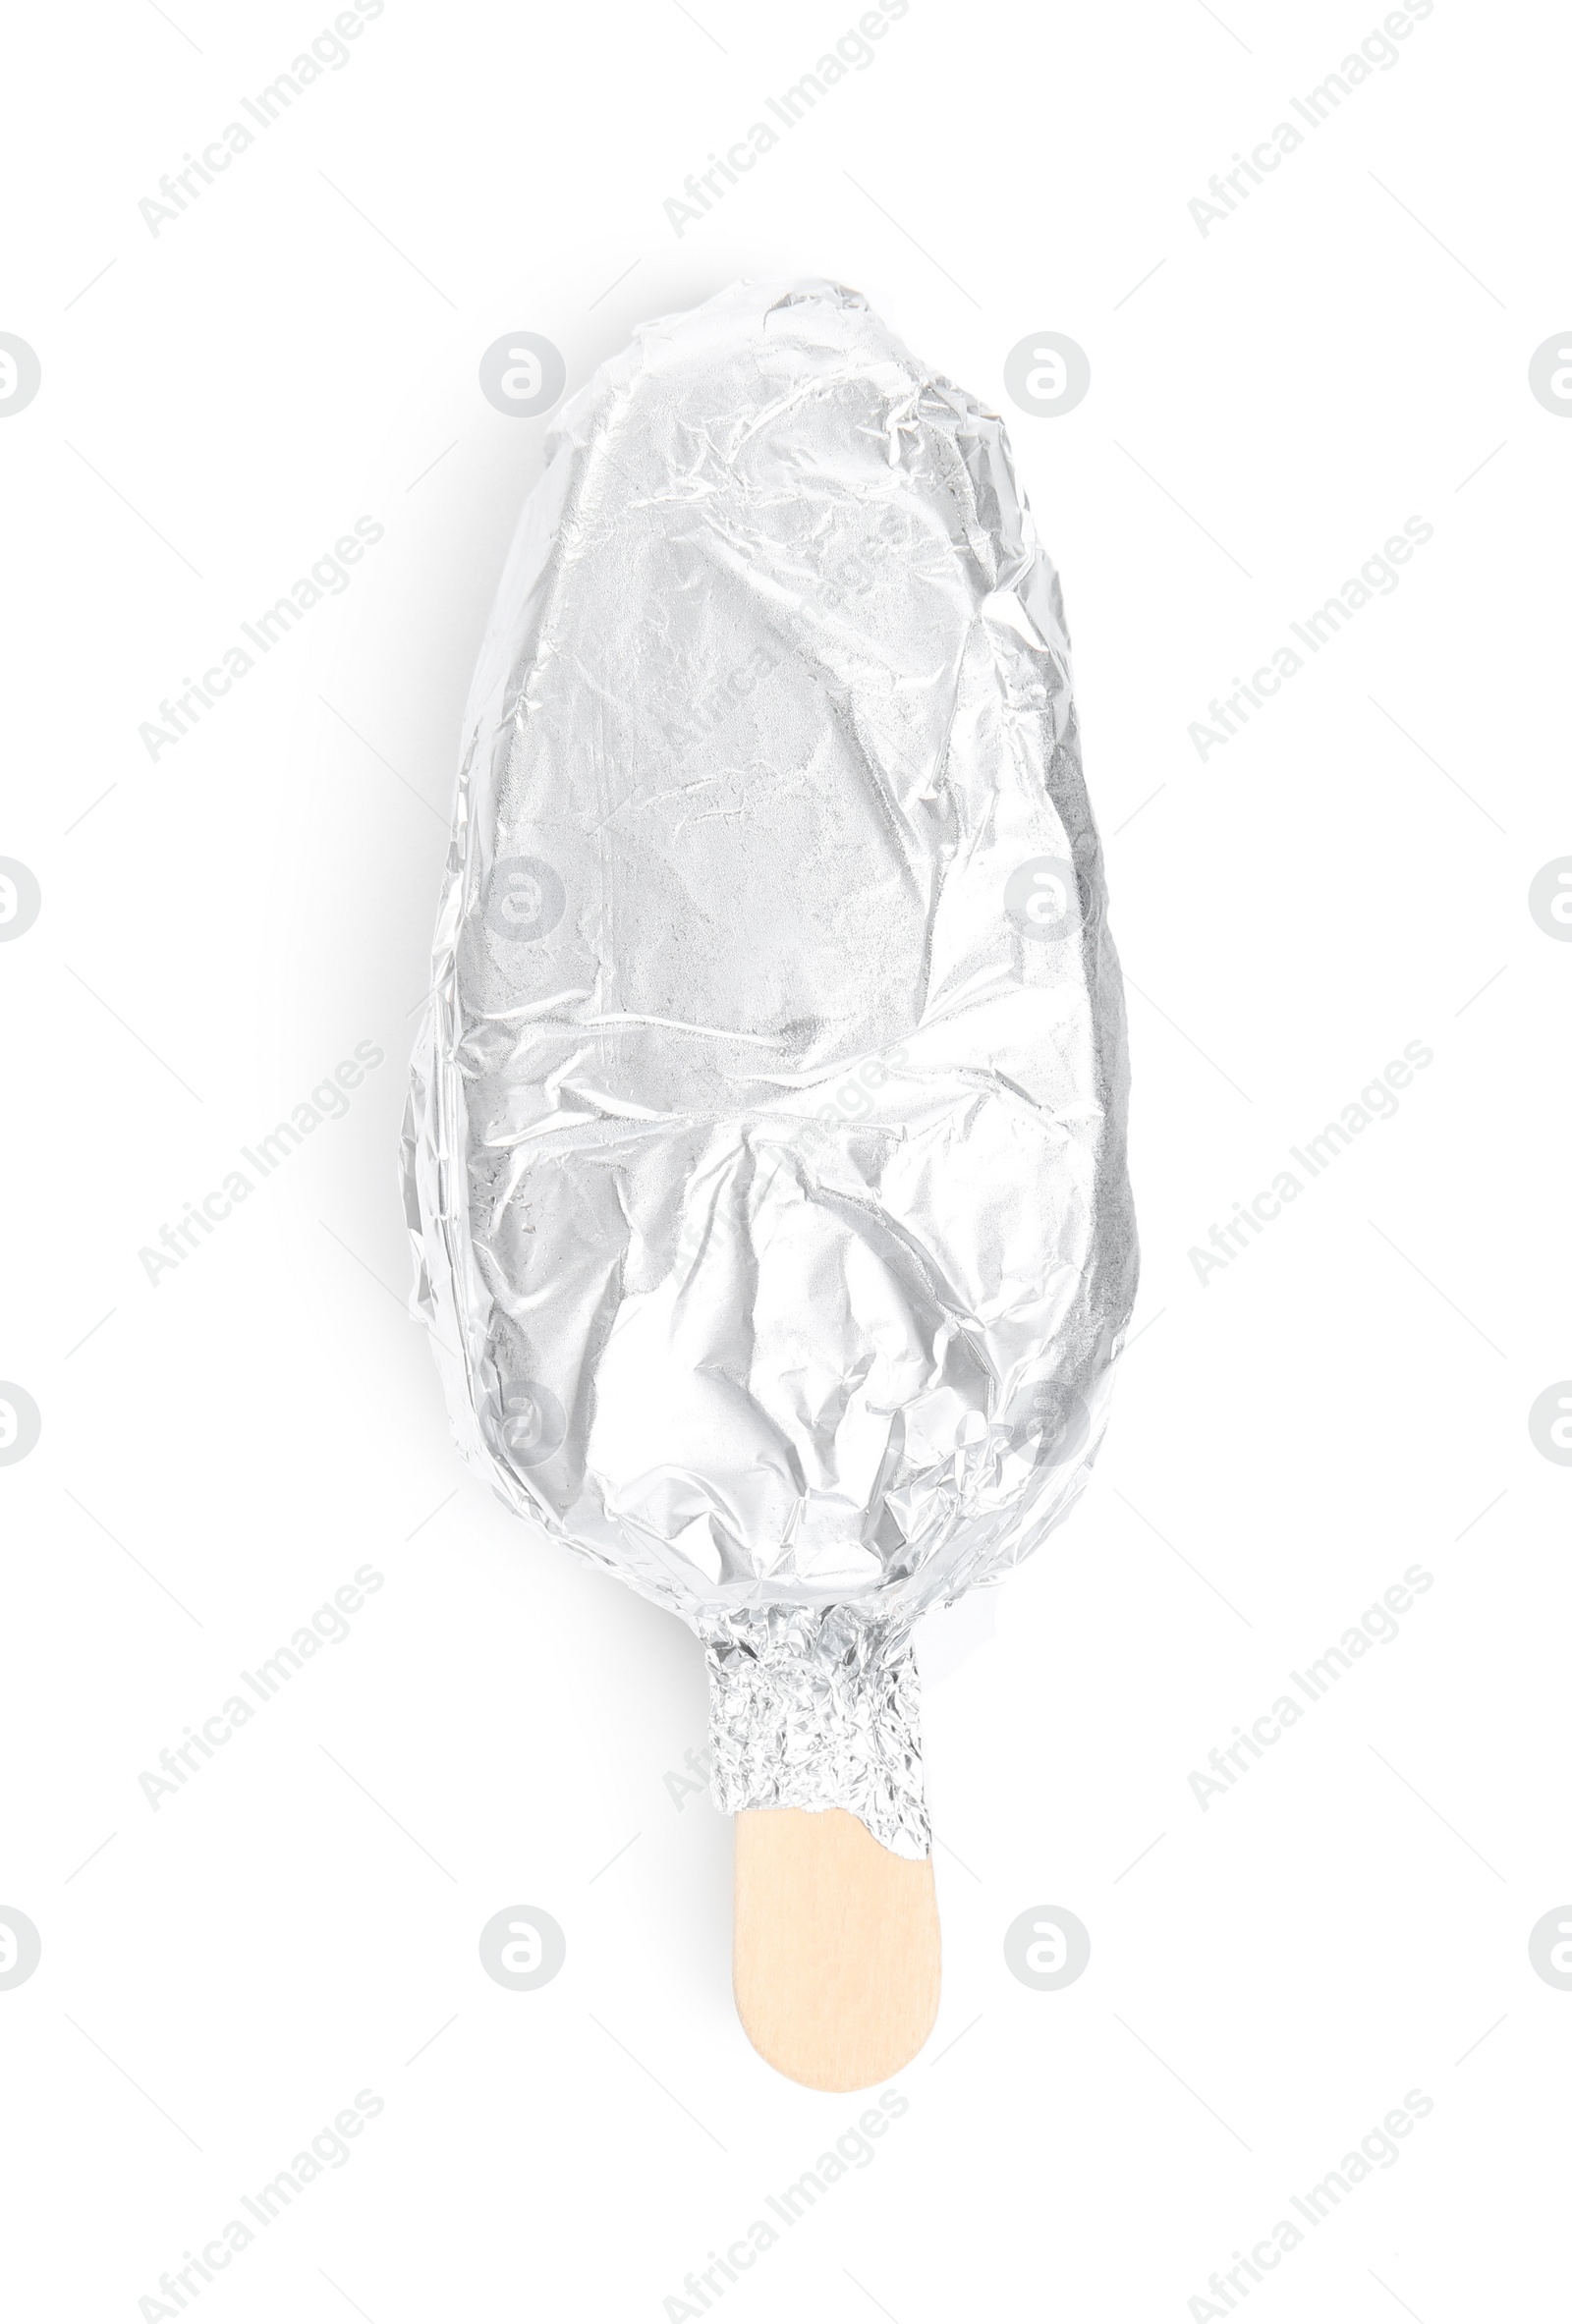 Photo of Ice cream bar wrapped in foil on white background, top view